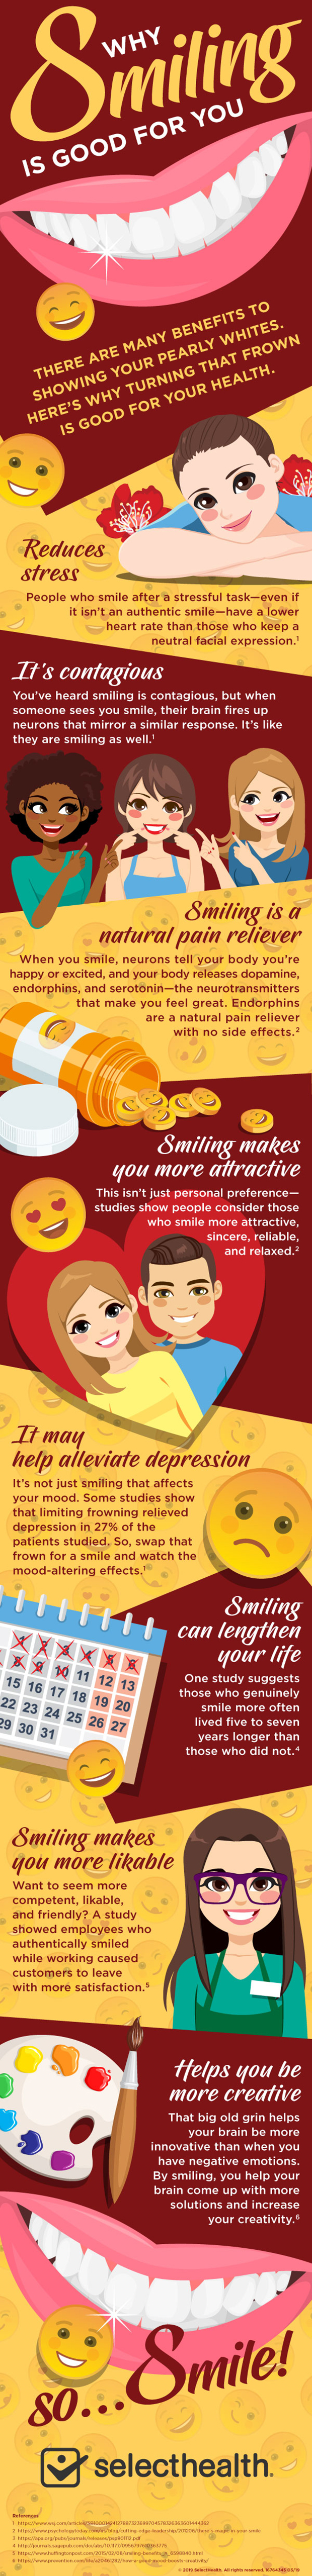 Why Smiling is Good For You Infographic